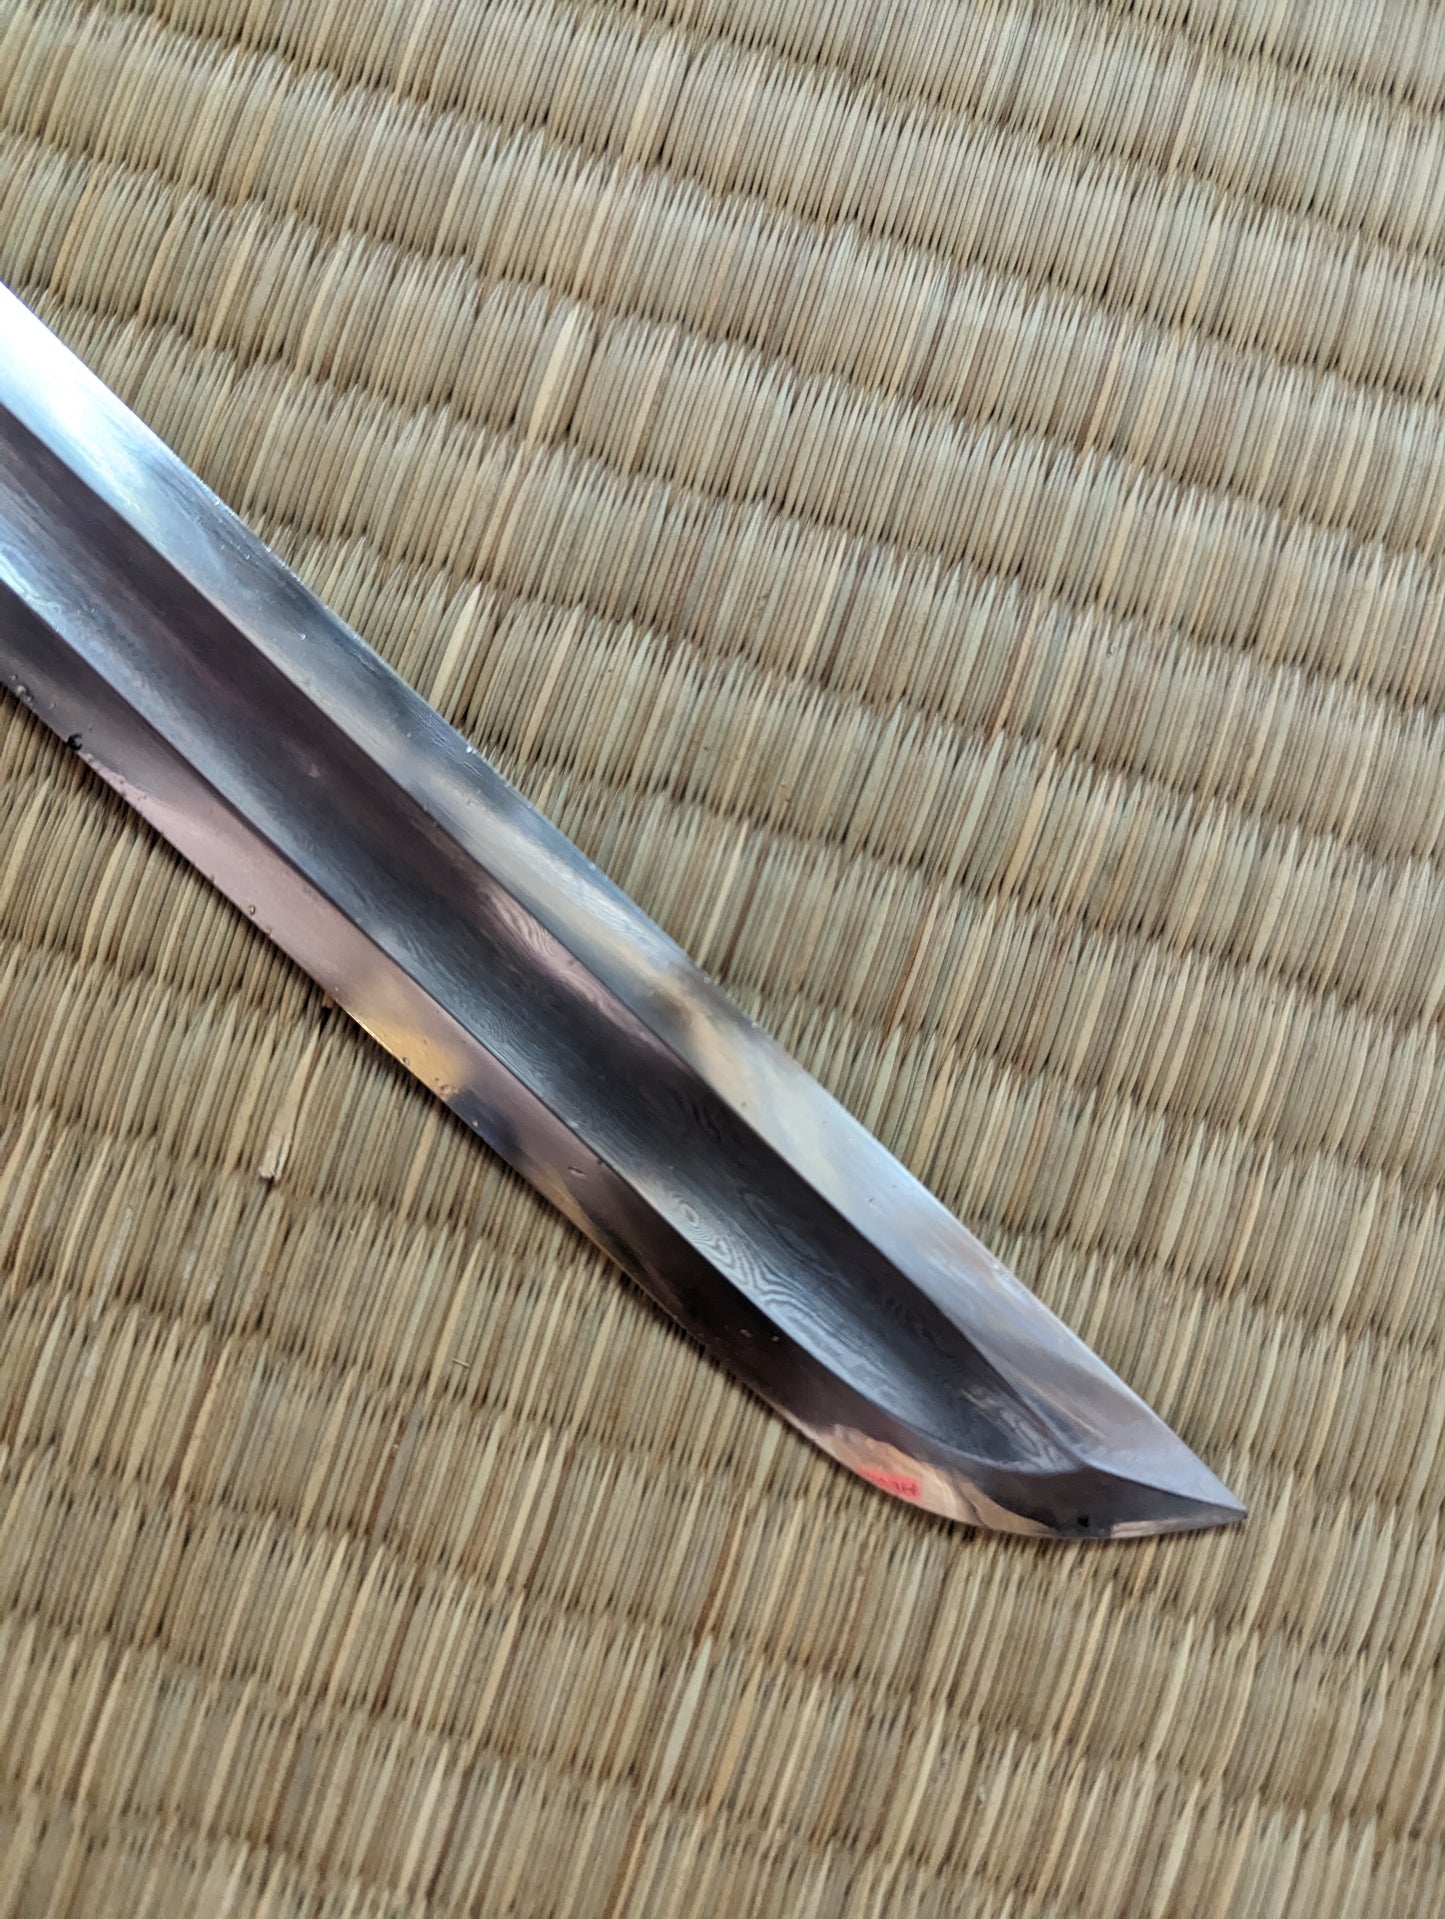 Tang Dao - Phoenix Fittings, Clay Tempered Damascus Steel